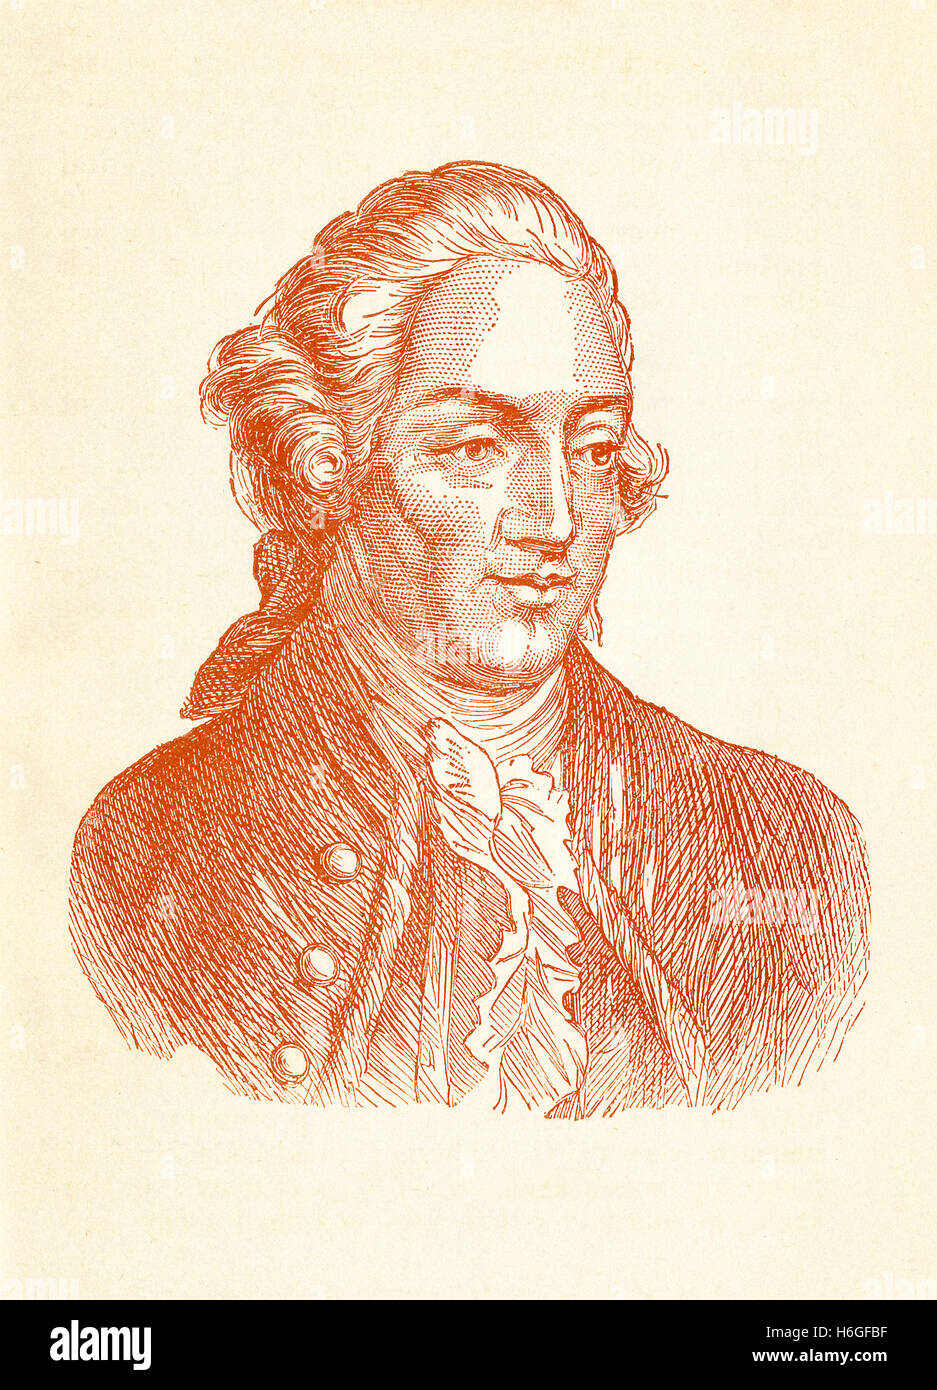 This illustration is of John Hancock (1737-1793), who  was an American Revolutionary patriot, a signer of the Declaration of Independence. He urged resistance to  Britain, the country controlling the colonies. He was president of the Continental Congress from 1775-1777. This illustration accompanied the novel 'Twice Told Tales' (dating to c. 1895) by the American novelist Nathaniel Hawthorne (1804-1864). Stock Photo